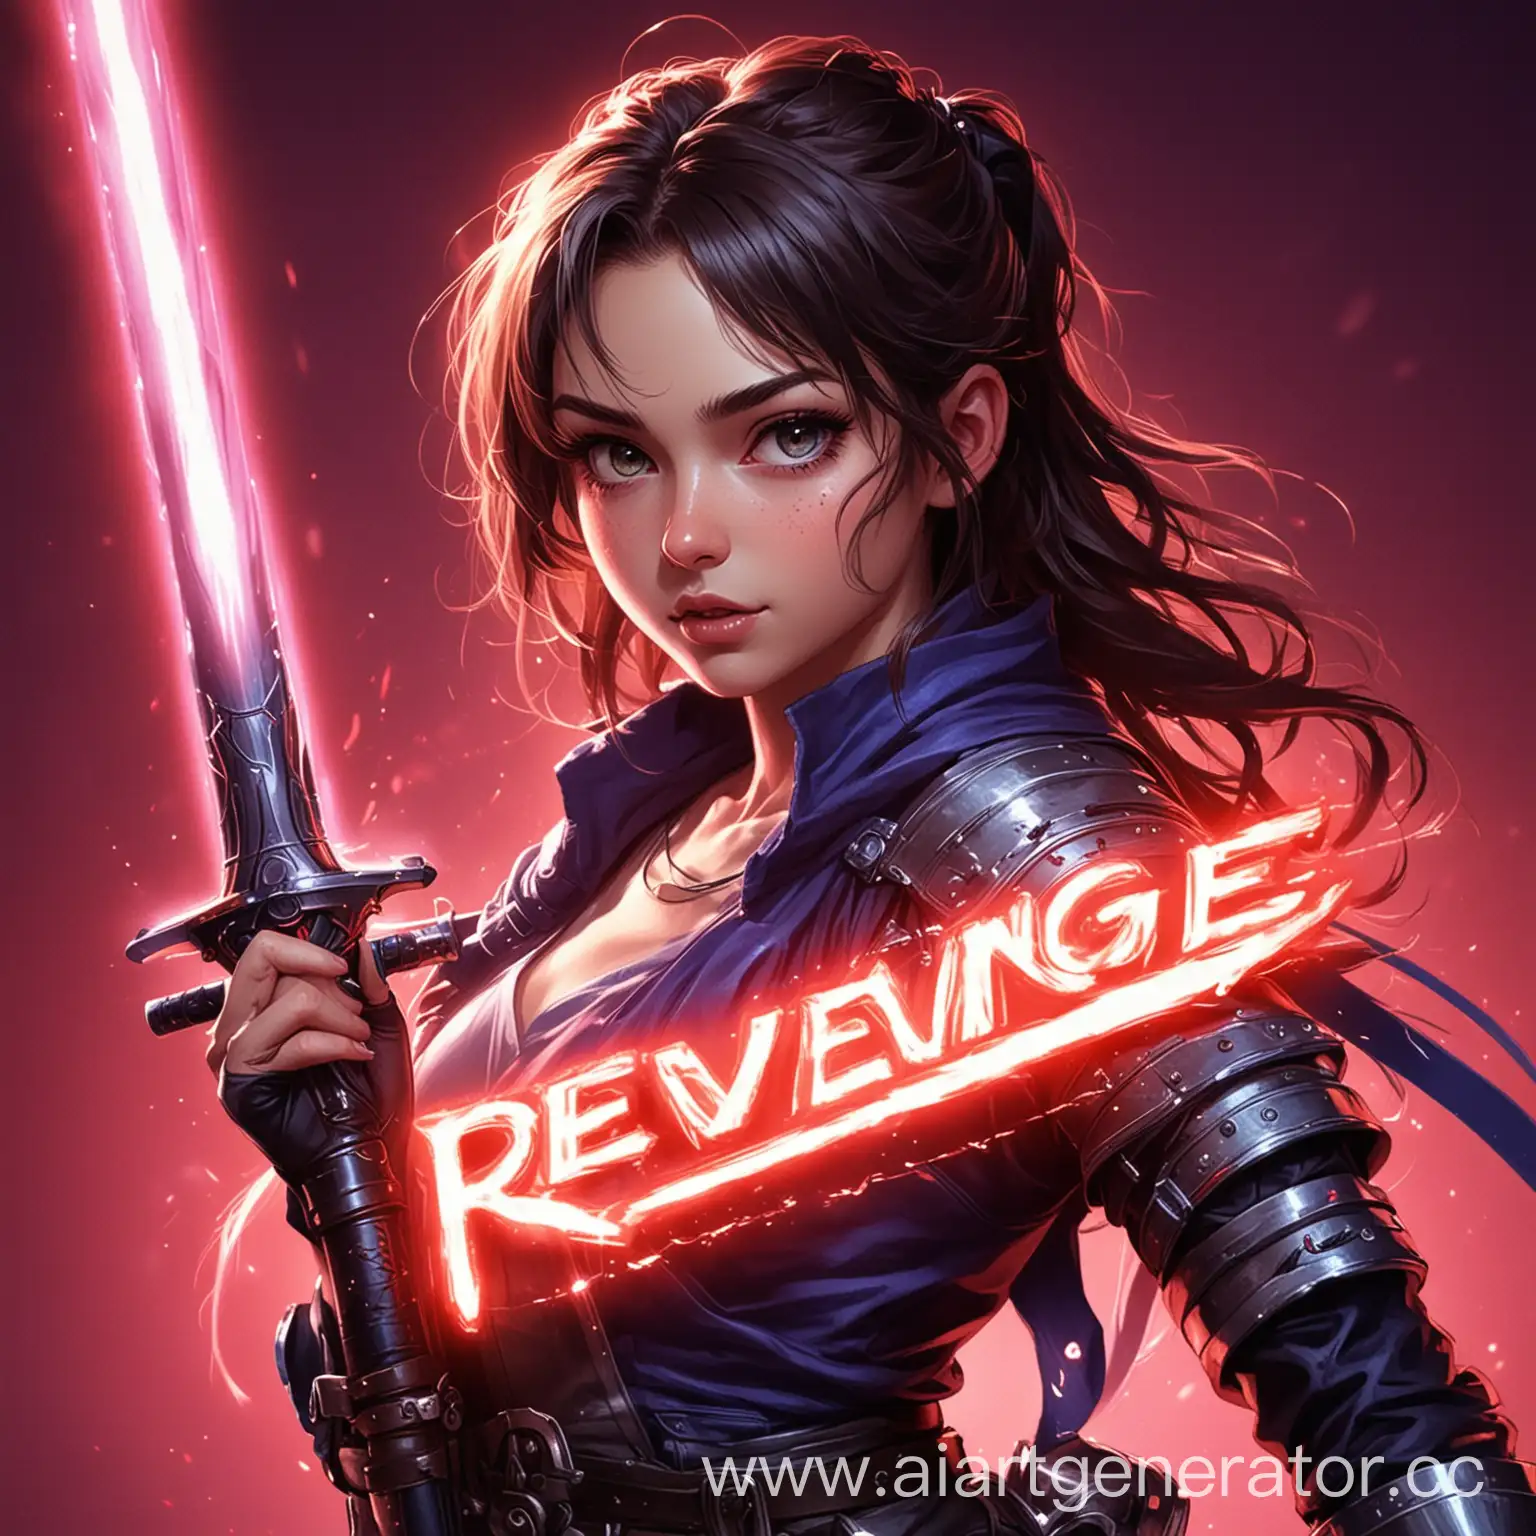 draw a phonk-themed girl, her eyes are glowing, a bright neon light background, she holds a saber in her hand, the inscription behind the background is "REVENGE?!" Inscription